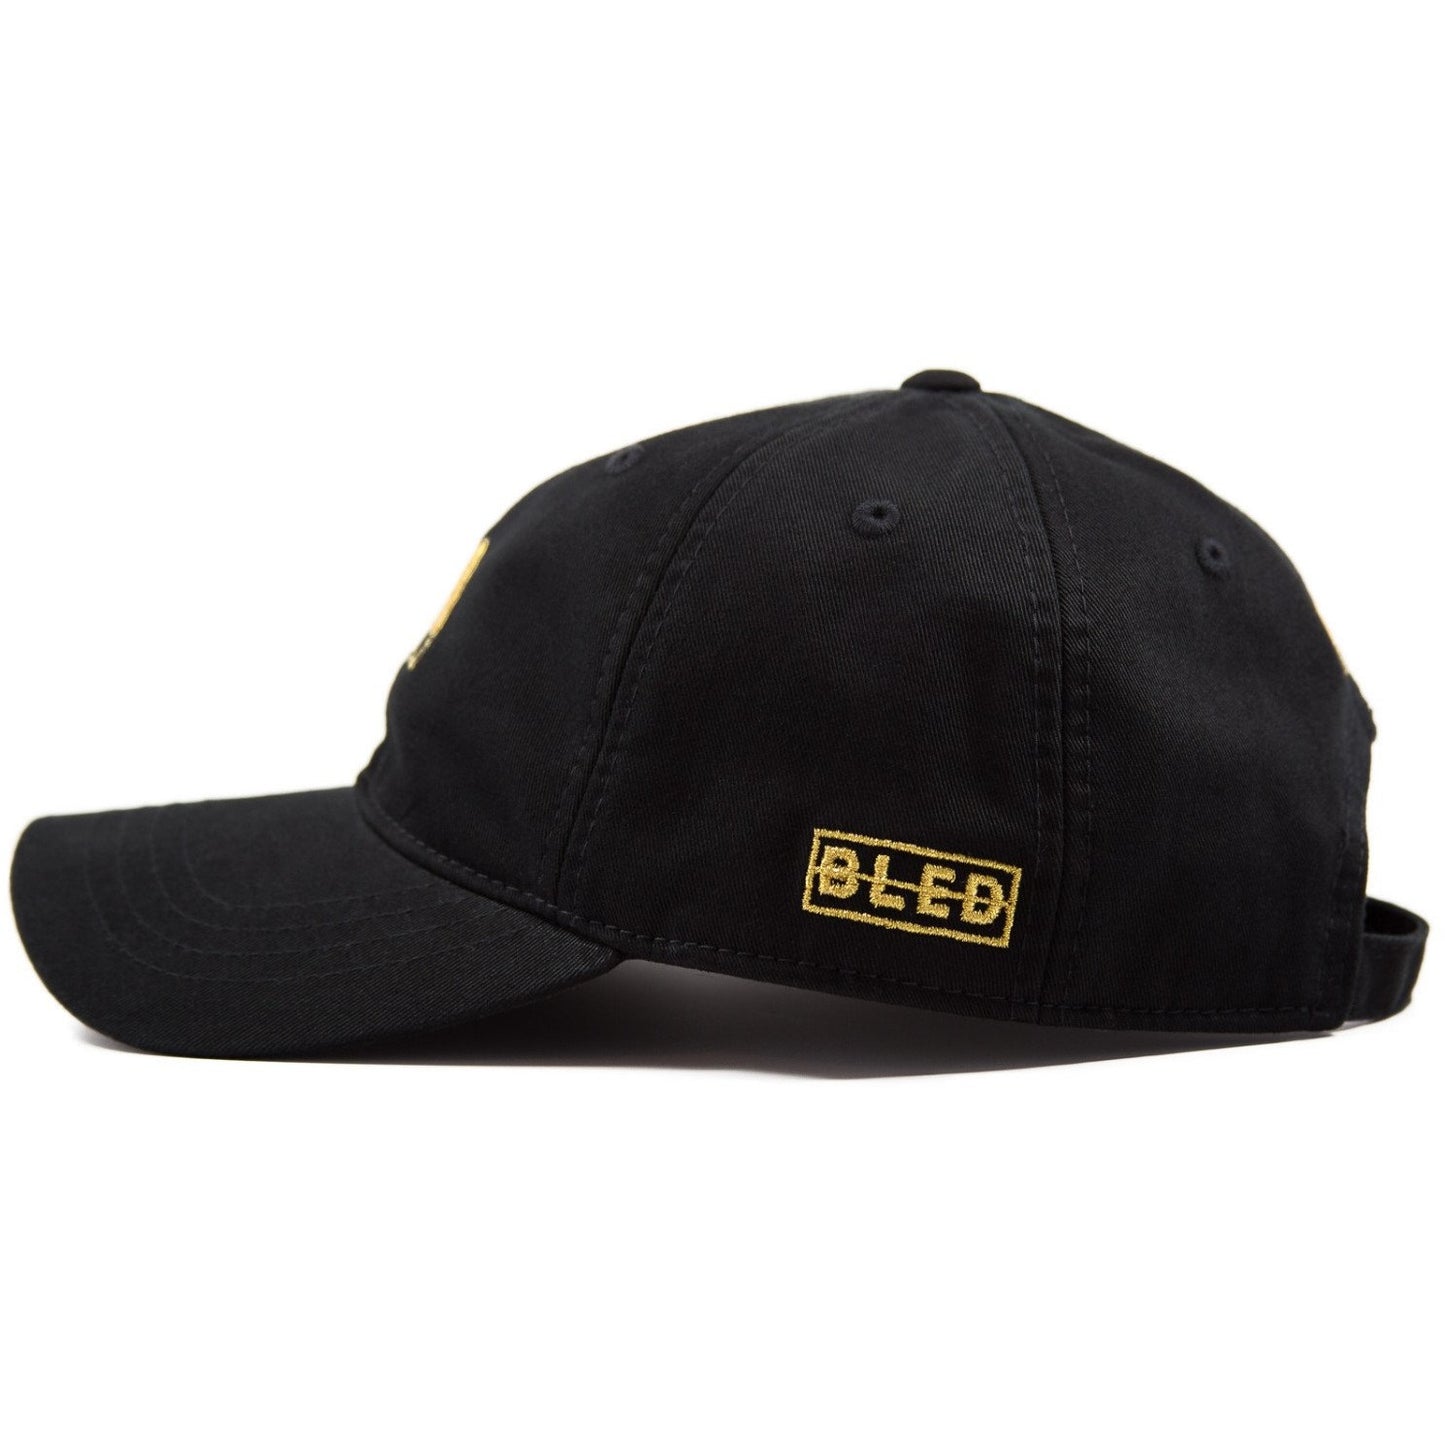 6-panel unconstructed 100% Cotton black dad hat featuring Levels design embroidery on the front and Bled logo embroidered on the back gold with adjustable strap closure.